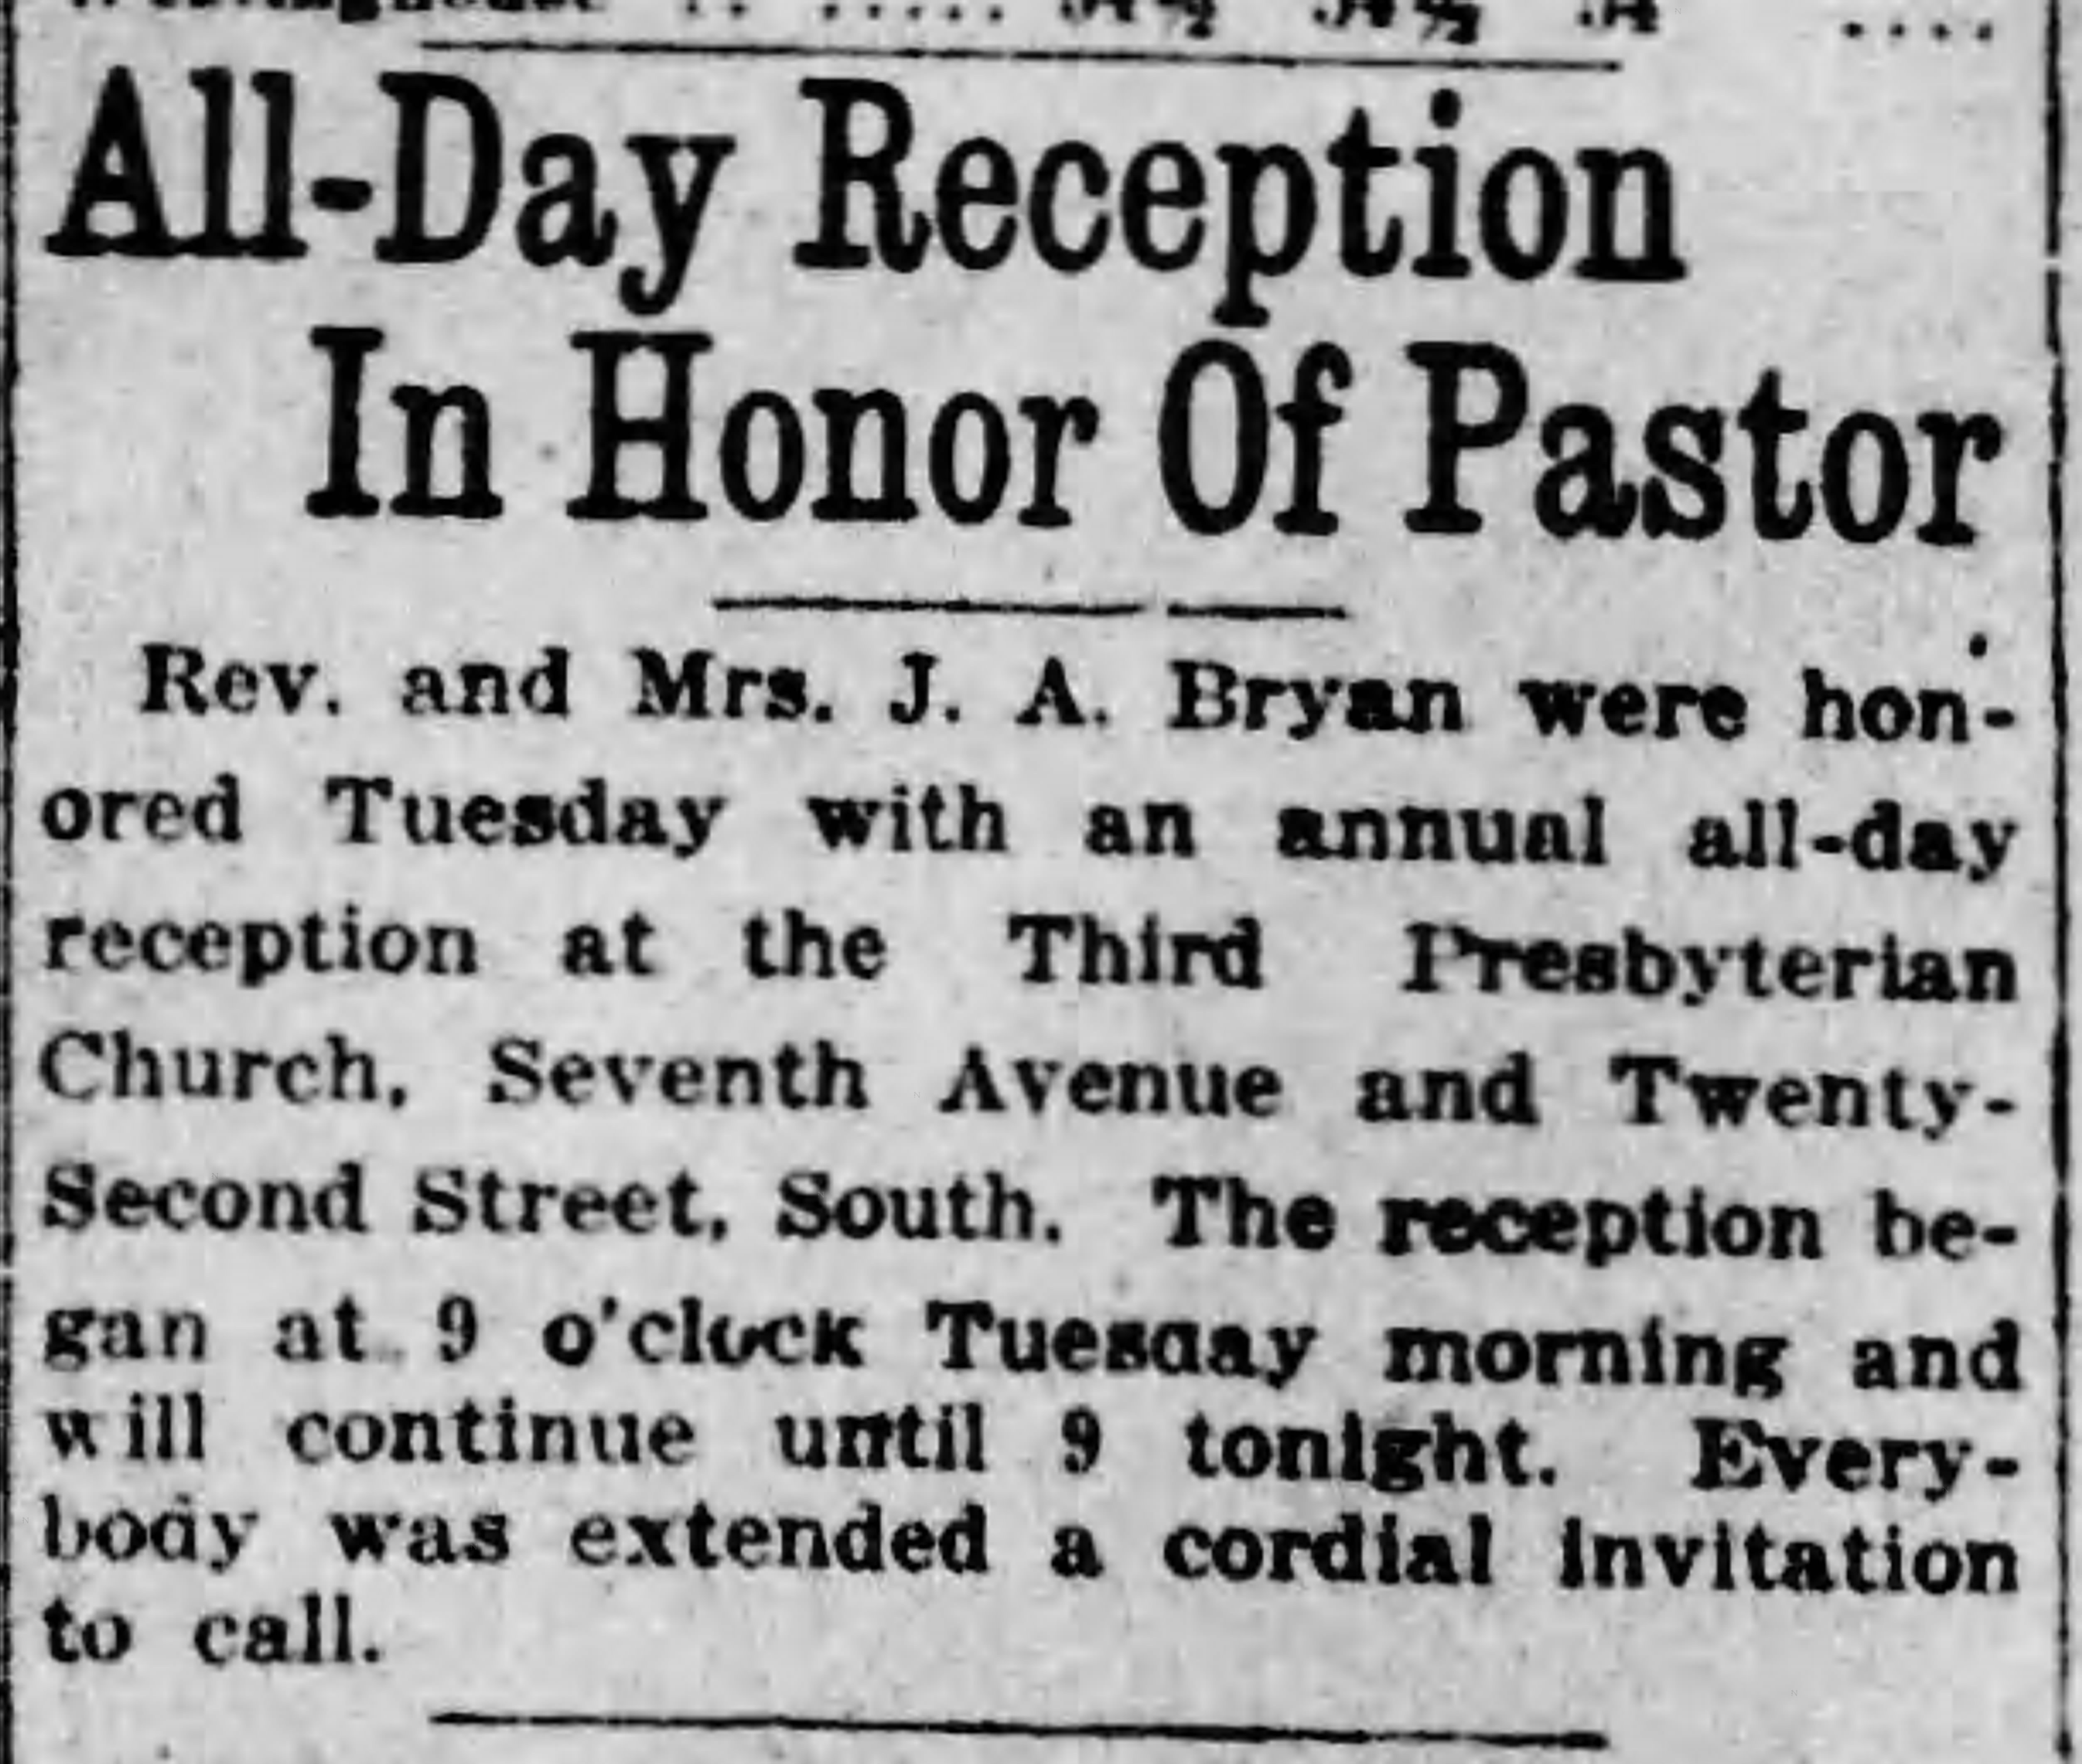 All-Day Reception In Honor of Pastor